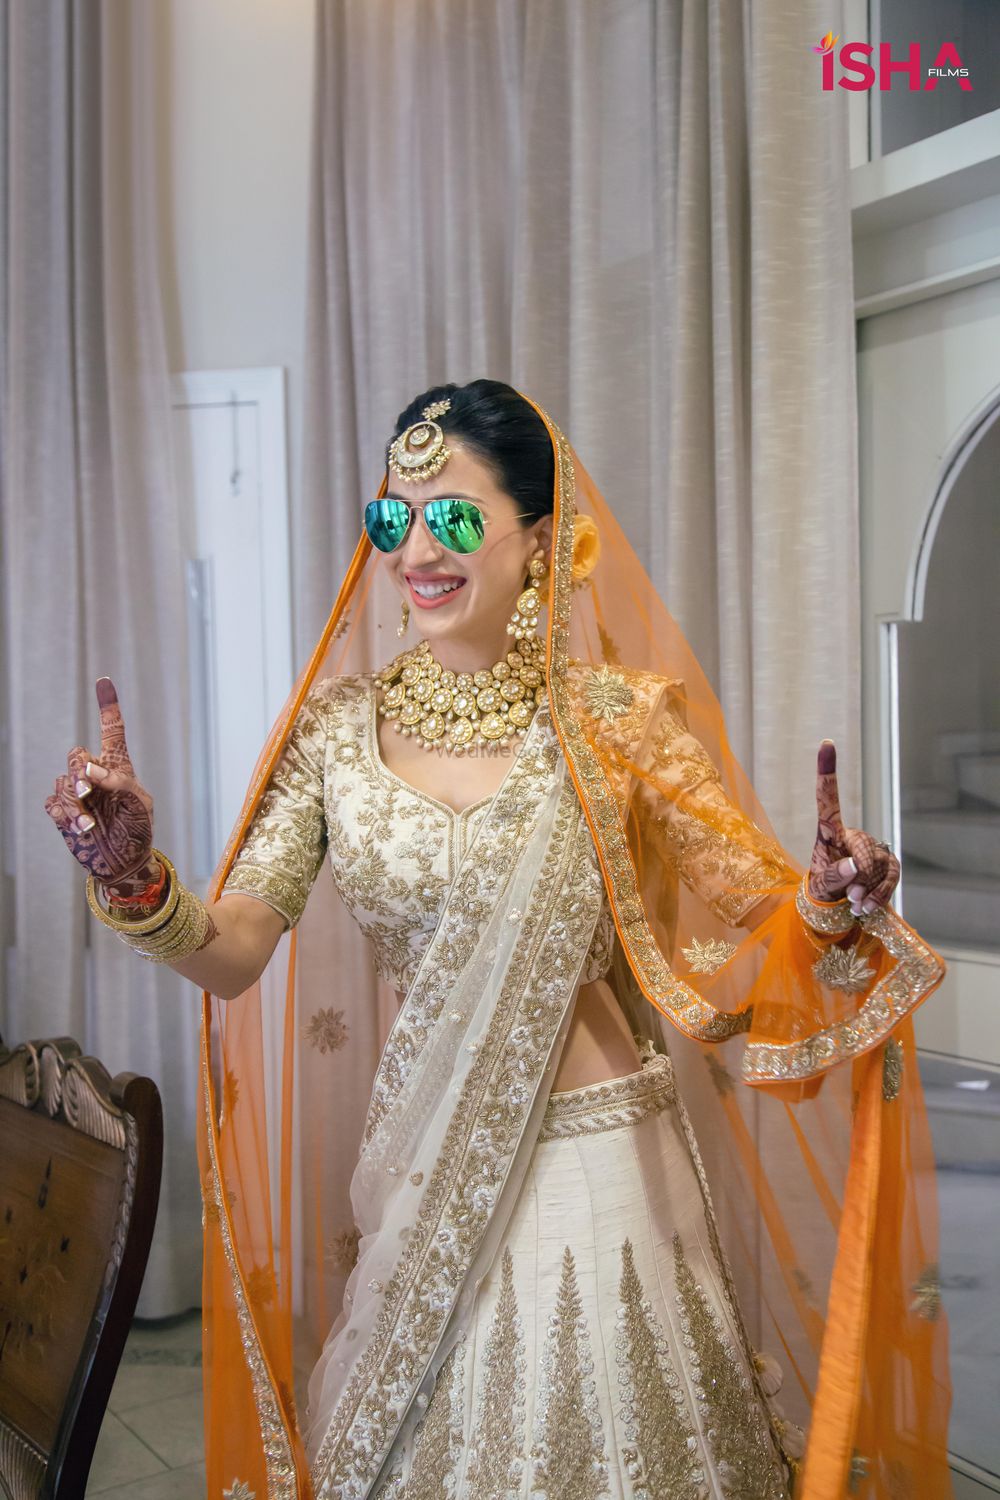 Photo of bride in ivory lehenga with a contrasting orange double dupatta